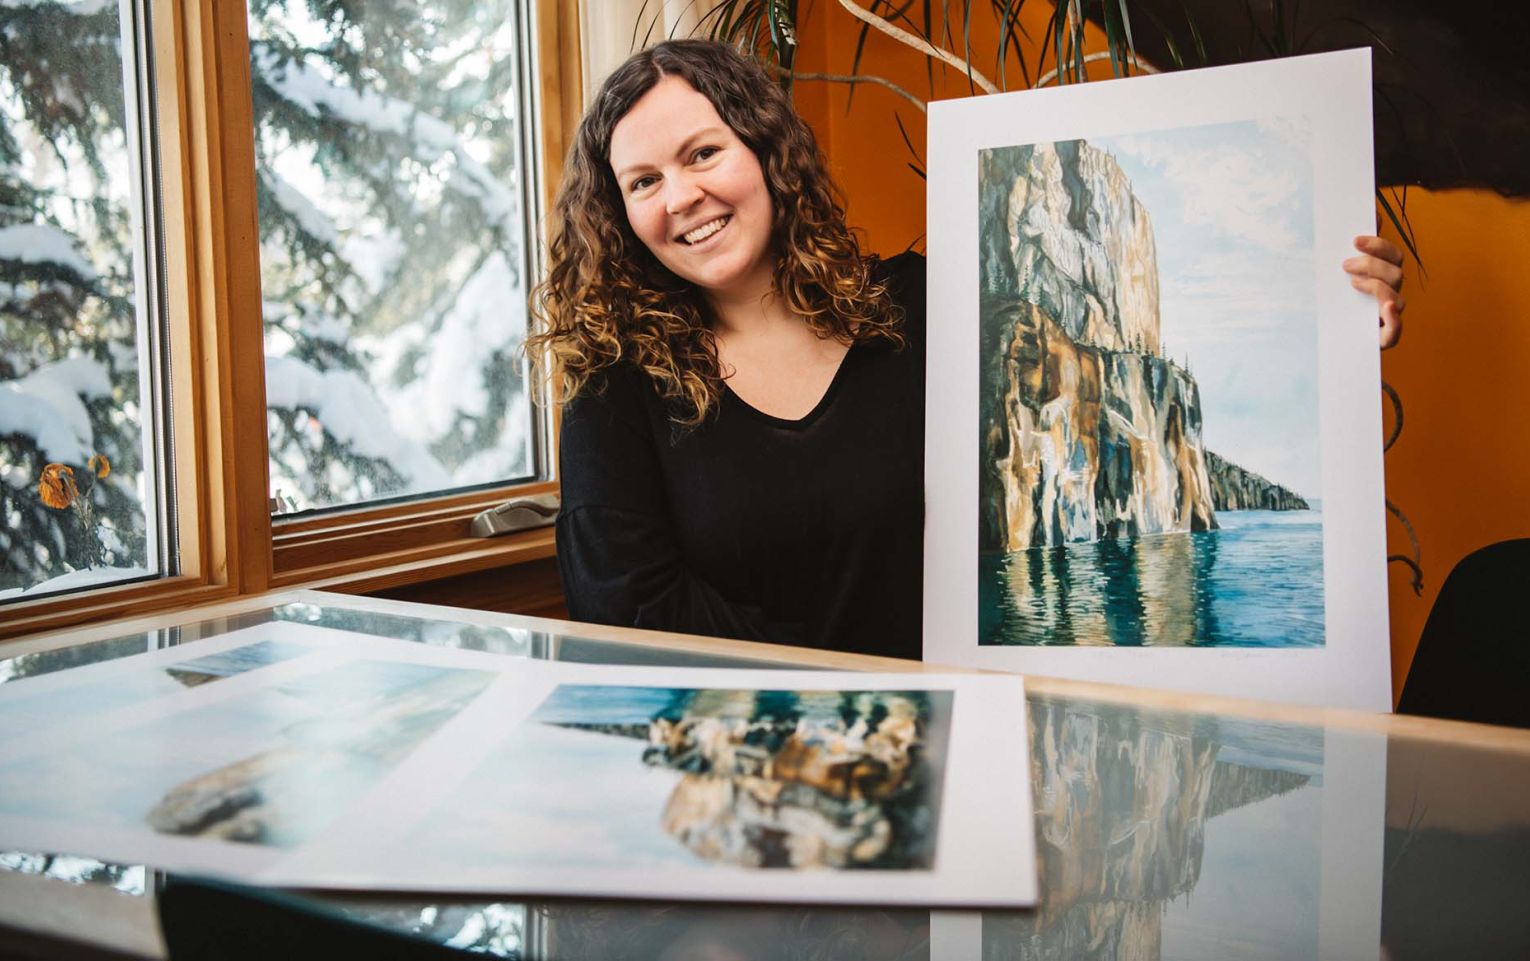 Maggie Davies, Northwest Territories Directory Art Contest winner, sits at a desk and smiles while holding a print of her art.  She is next to a window and snowy trees are visible outside. Inside, the room has a nice warm hue.